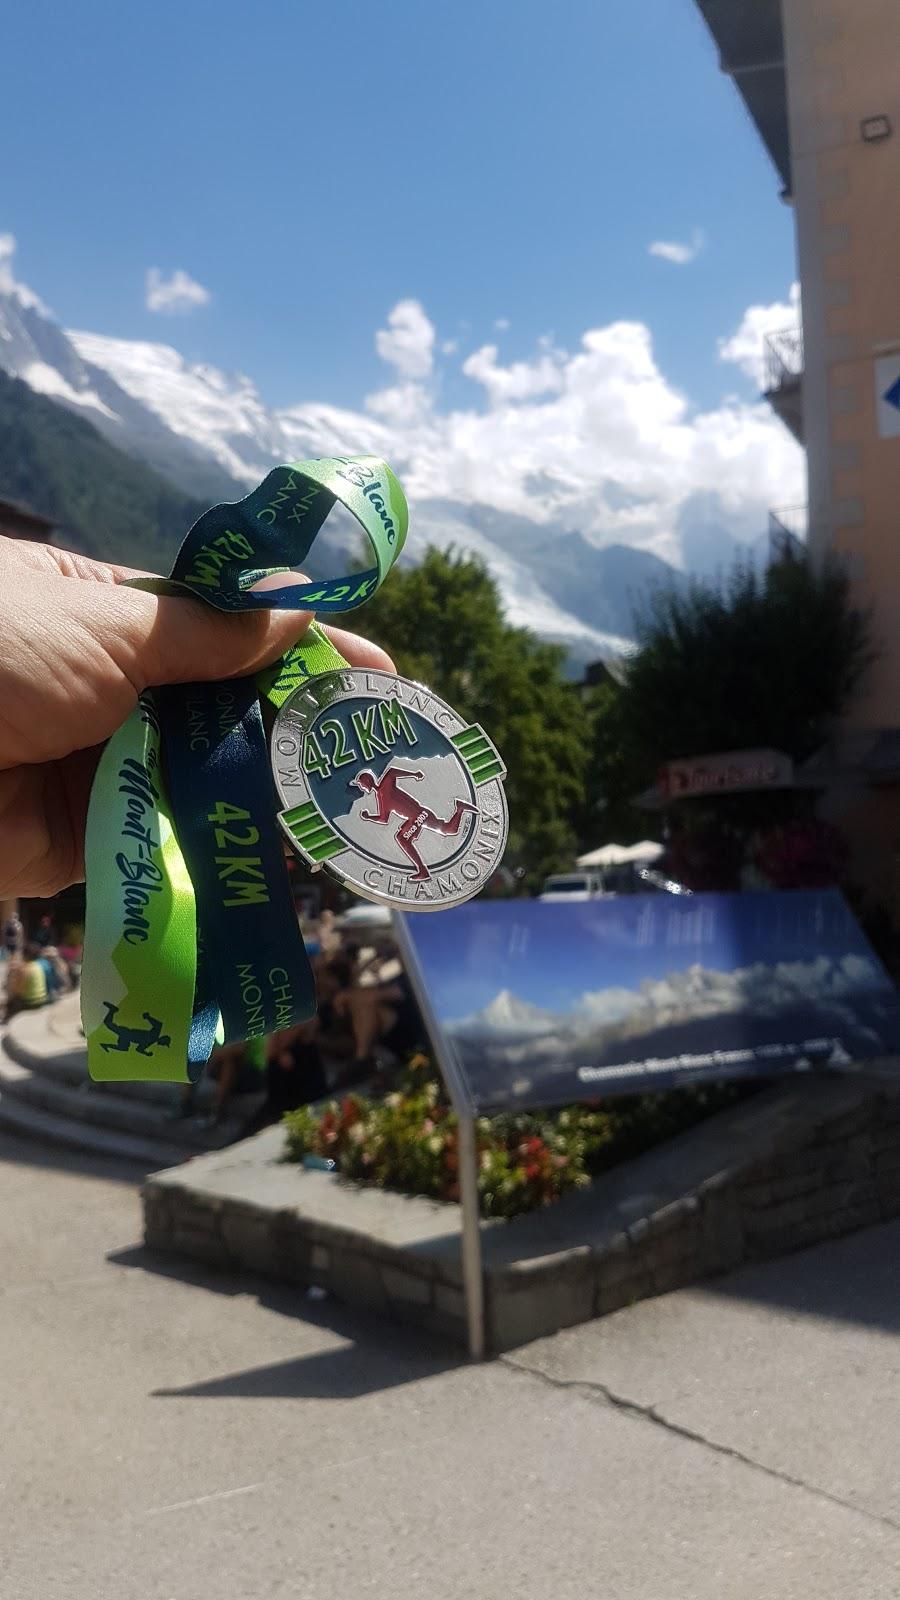 The race starts in Chamonix and drives runners through the gorgeous Alps mountain